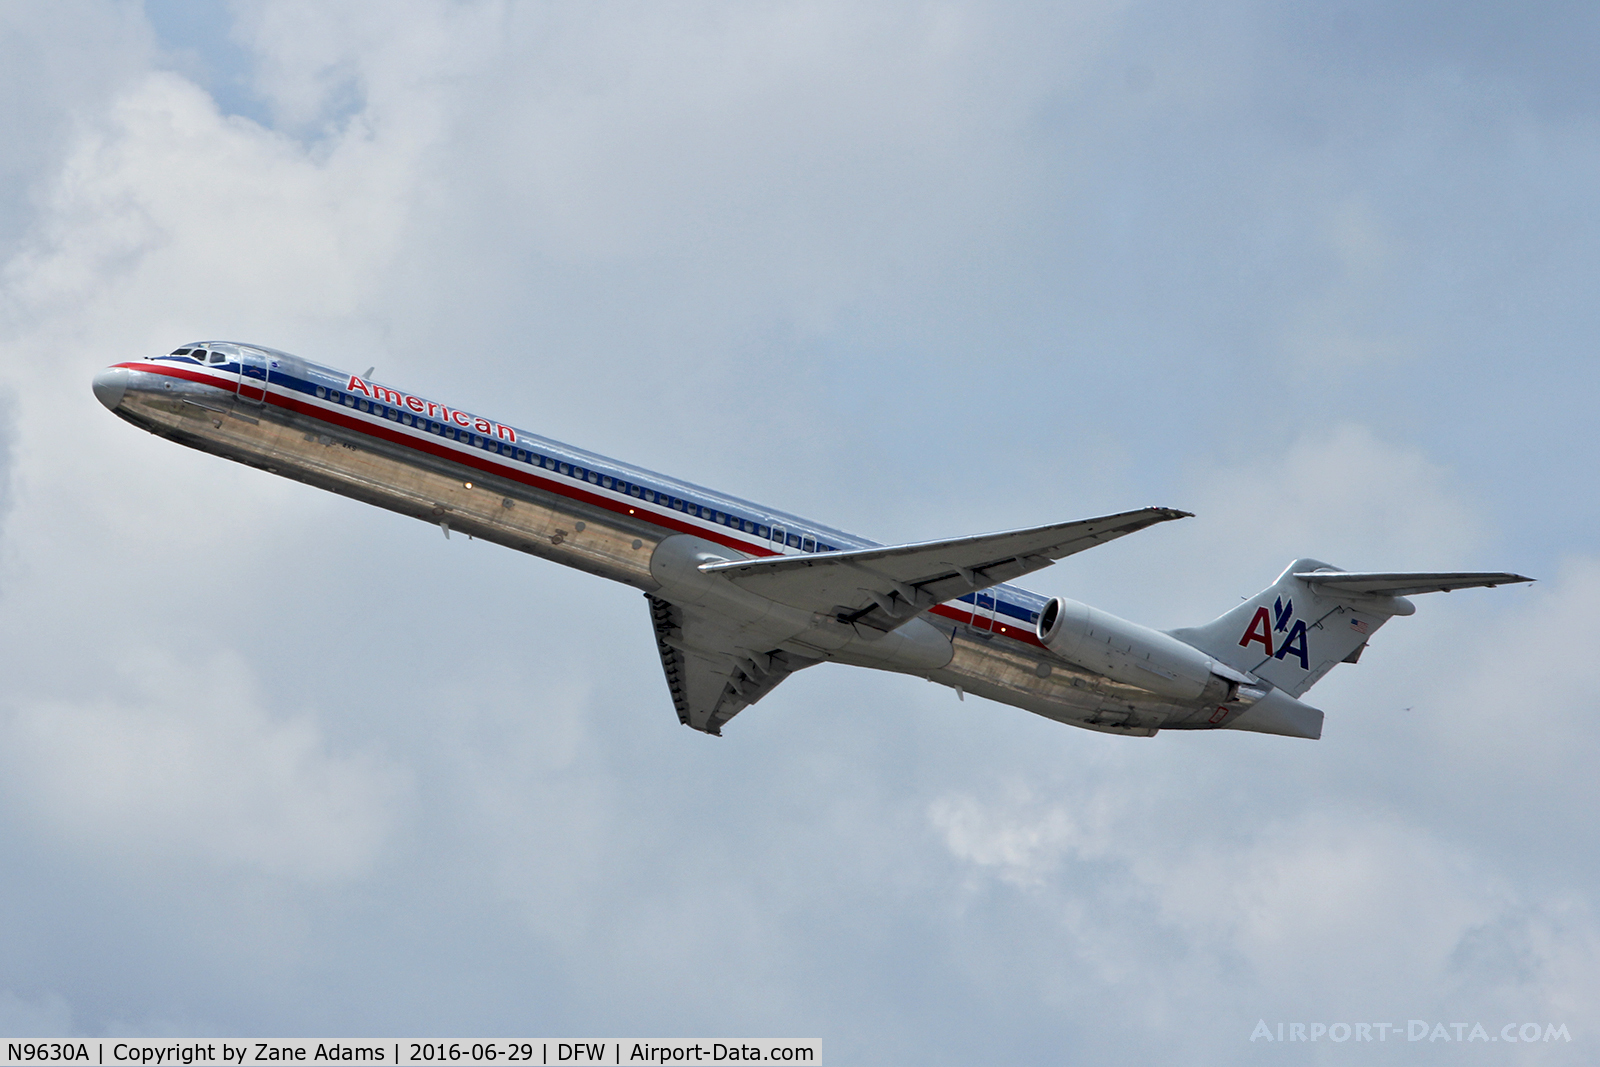 N9630A, 1997 McDonnell Douglas MD-83 (DC-9-83) C/N 53561, Departing DFW Airport